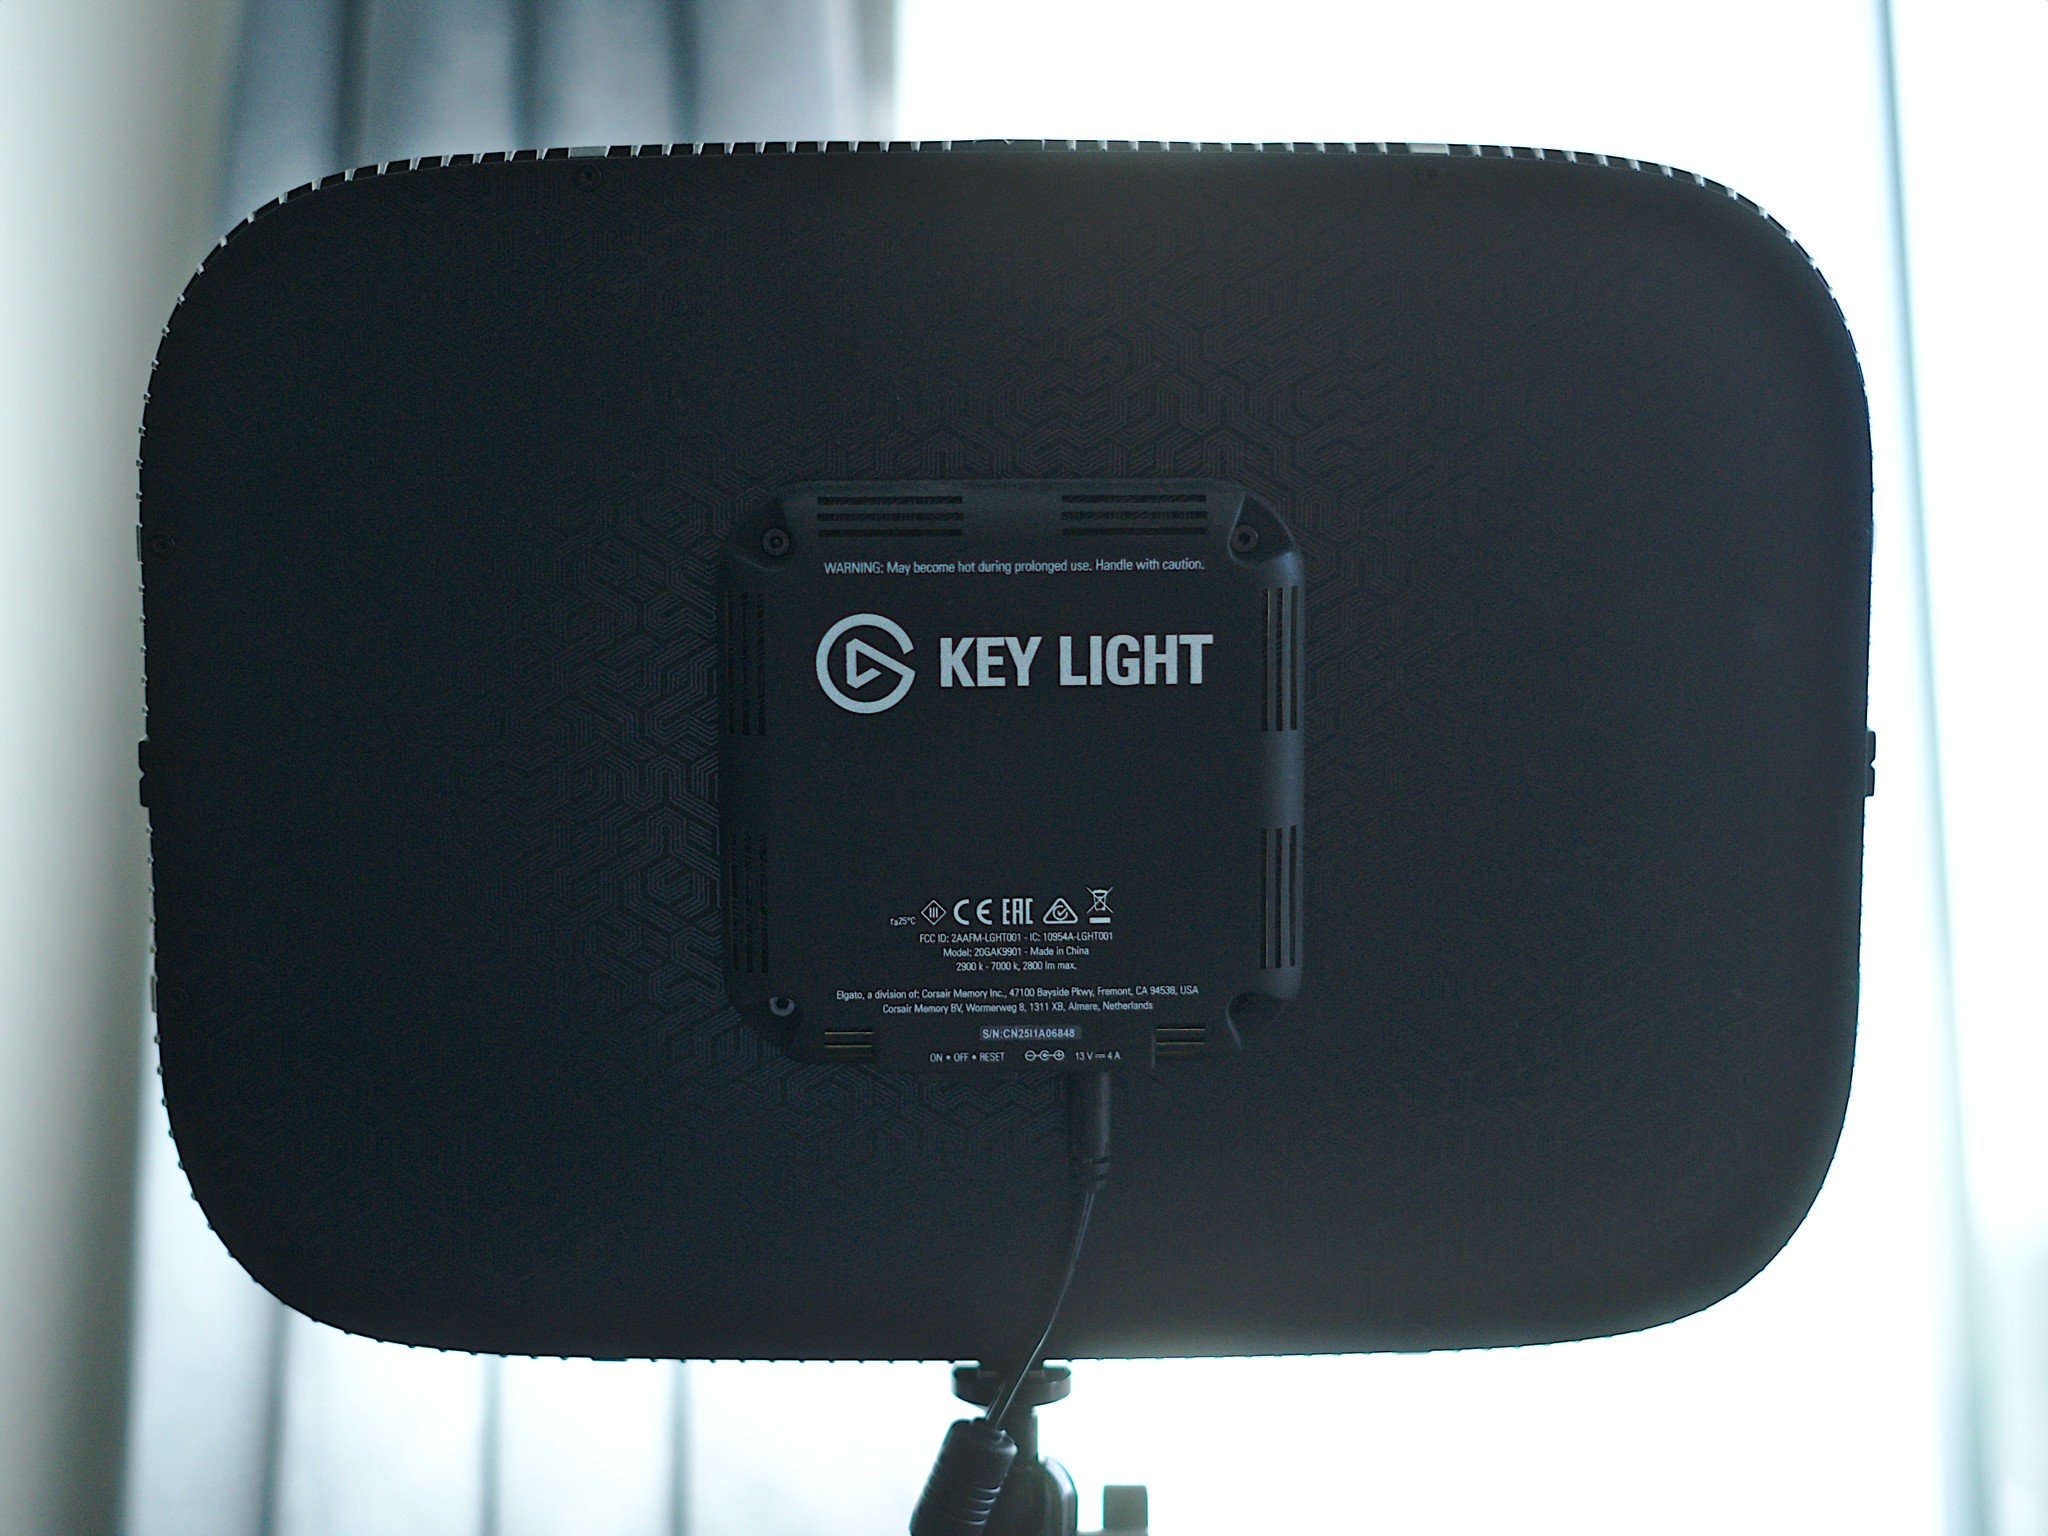 CES 2019: Elgato Key Light Gives Streamers Professional Lighting Quality